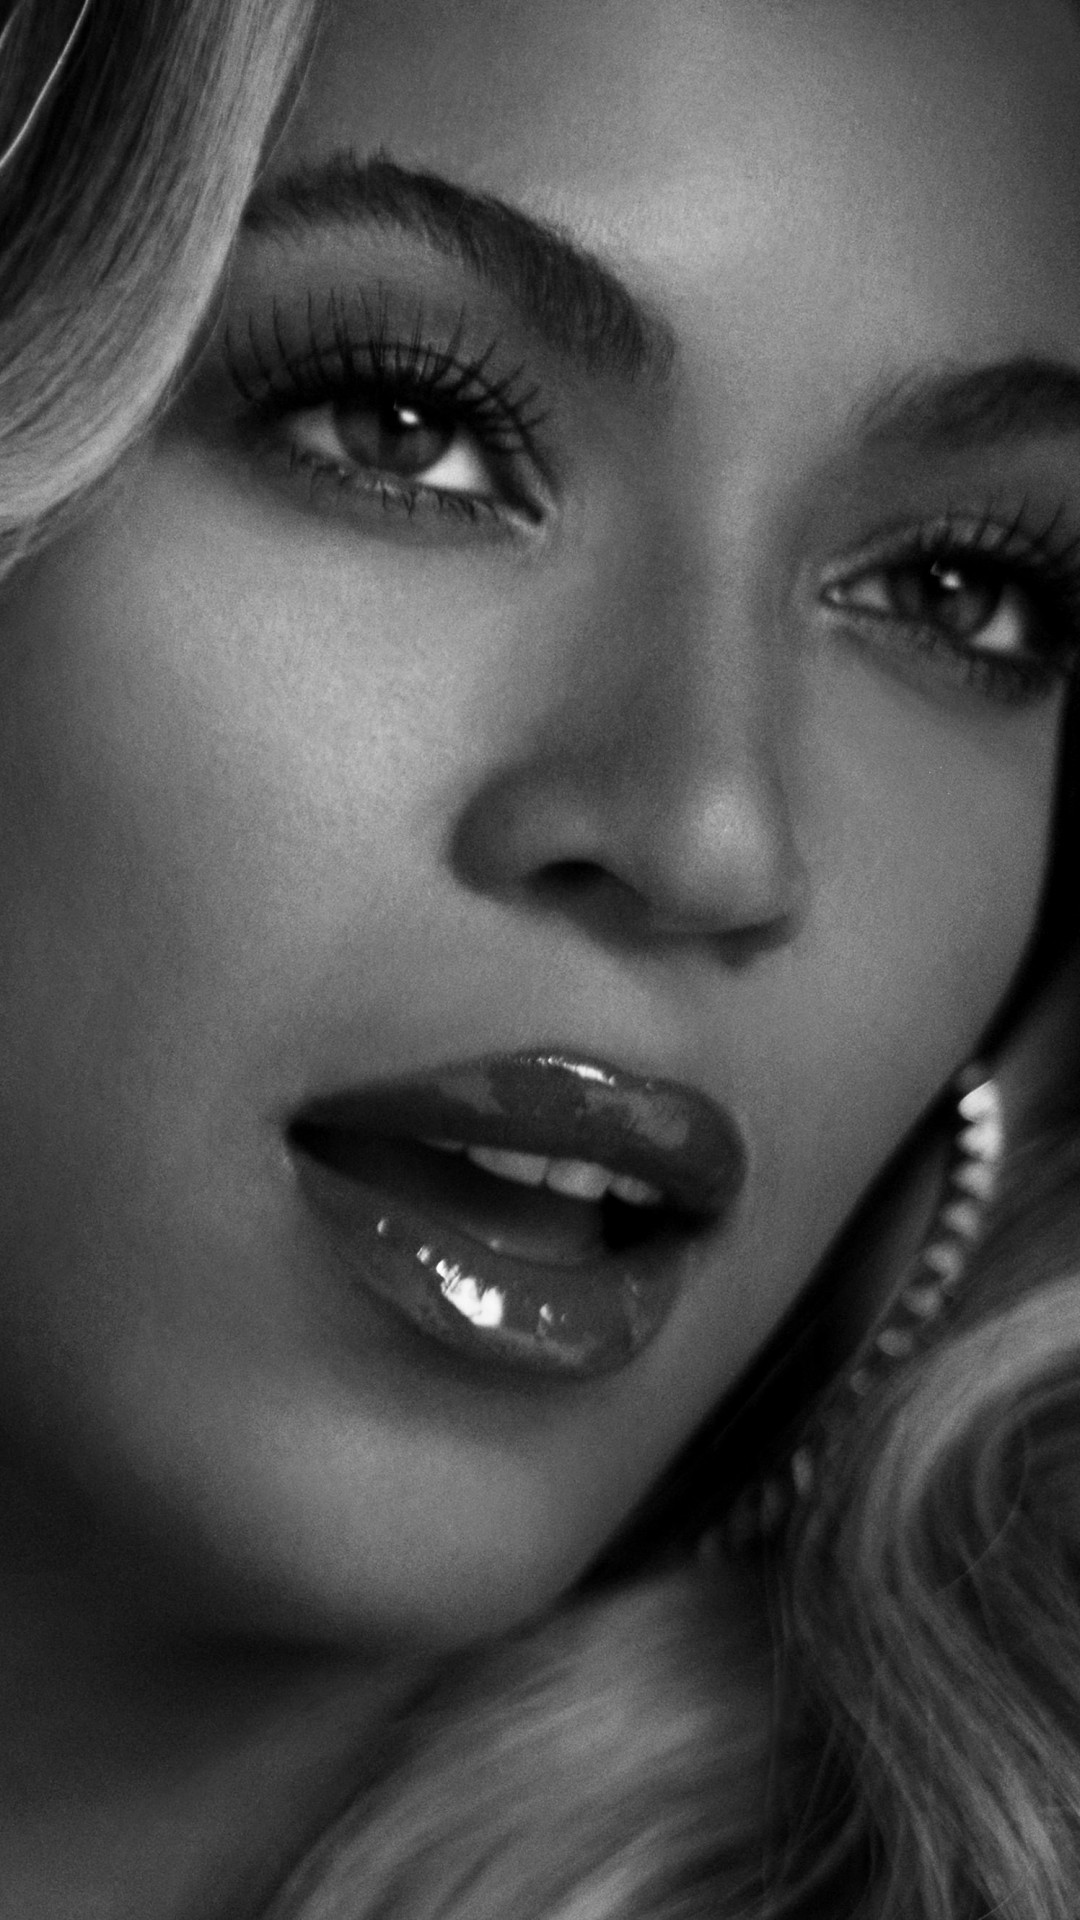 Beyonce in Black & White Wallpaper for SAMSUNG Galaxy S5